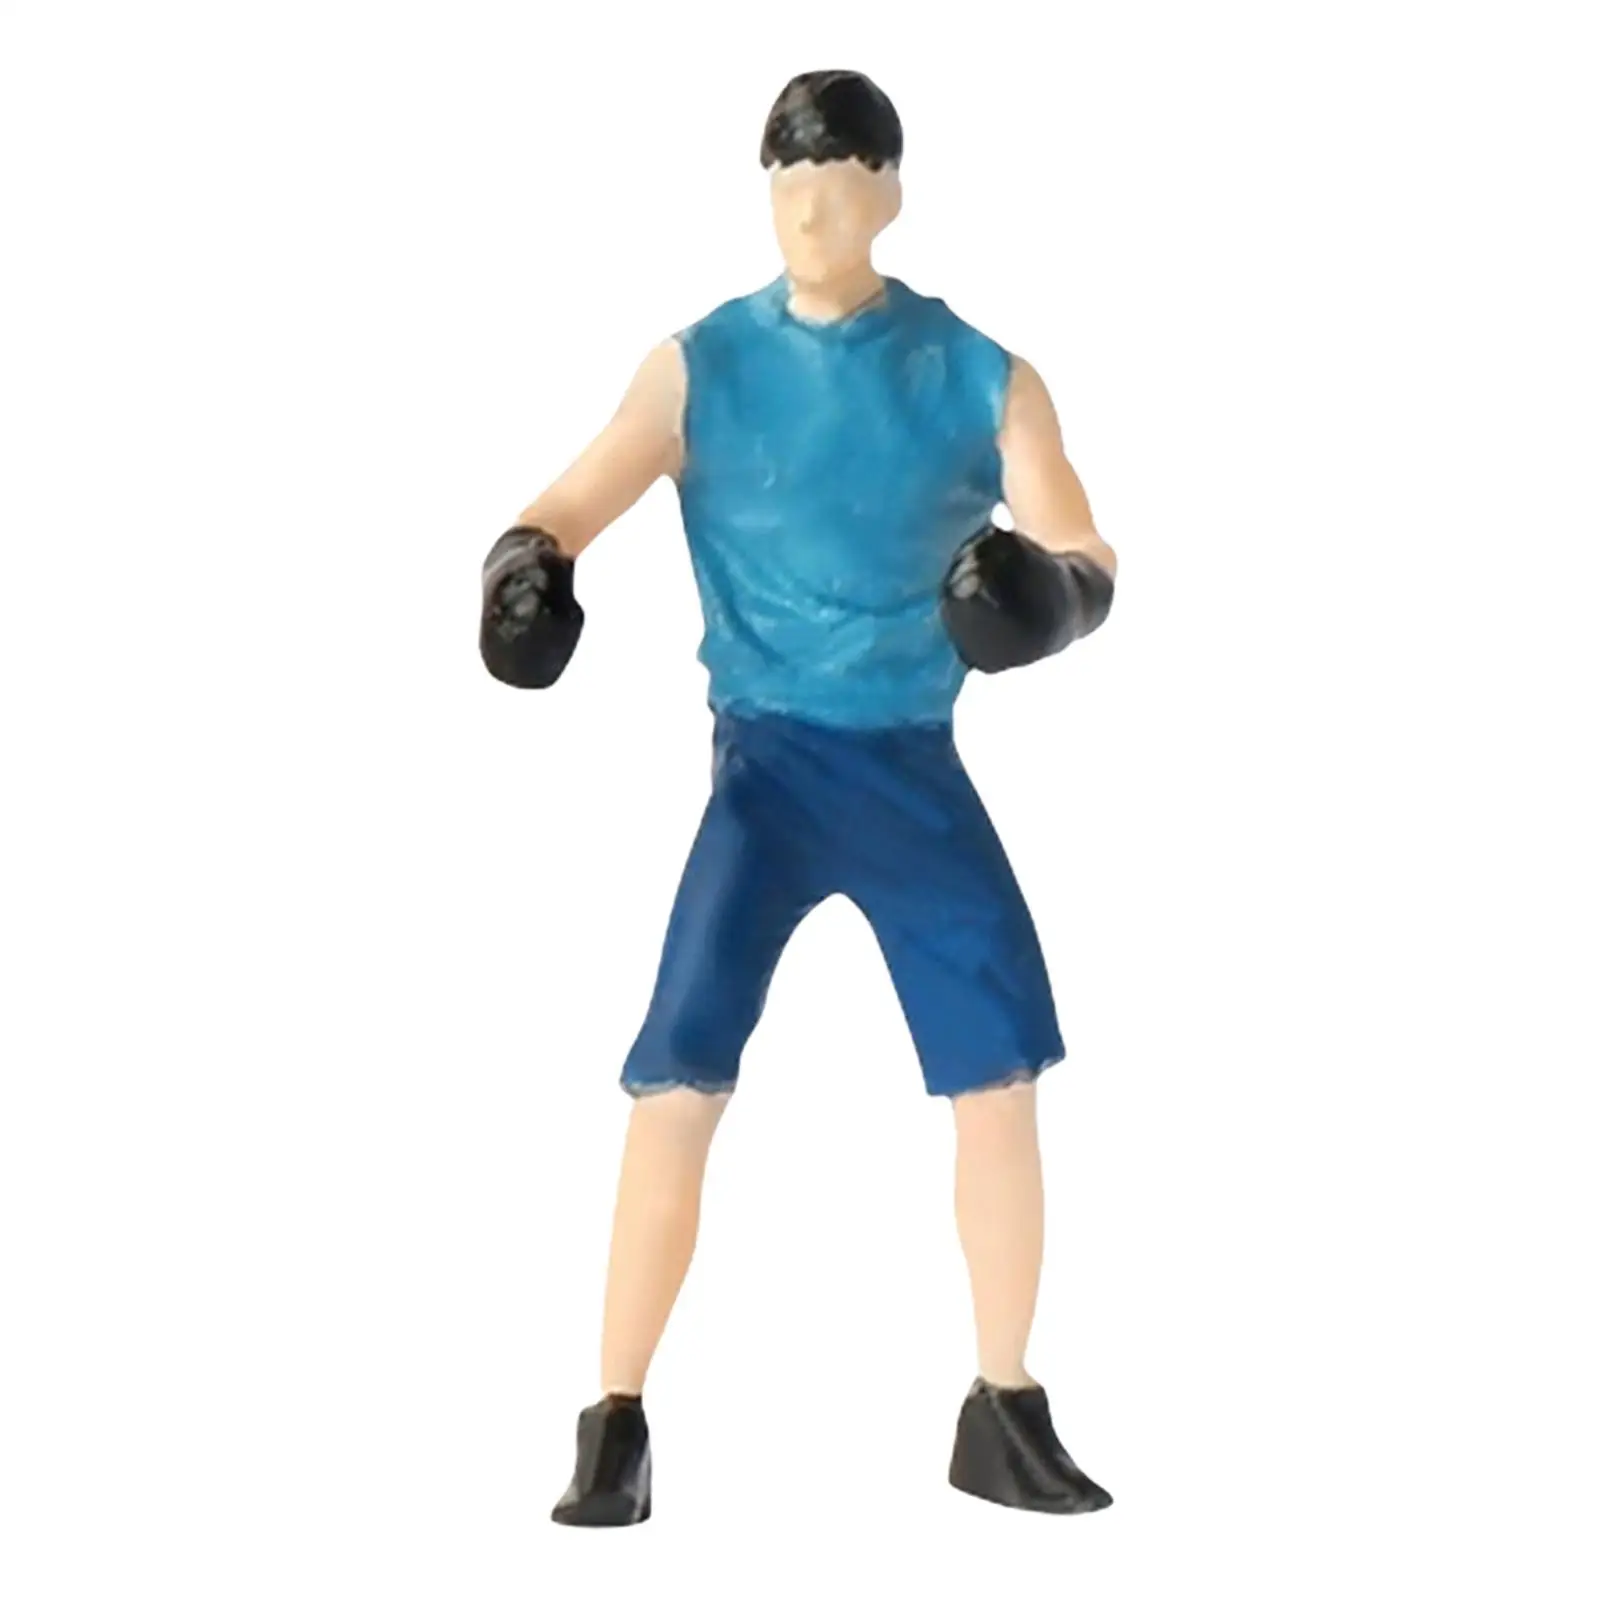 Hand Painted 1:64 Figures Boxing Figurines Tiny People for Miniature Scene